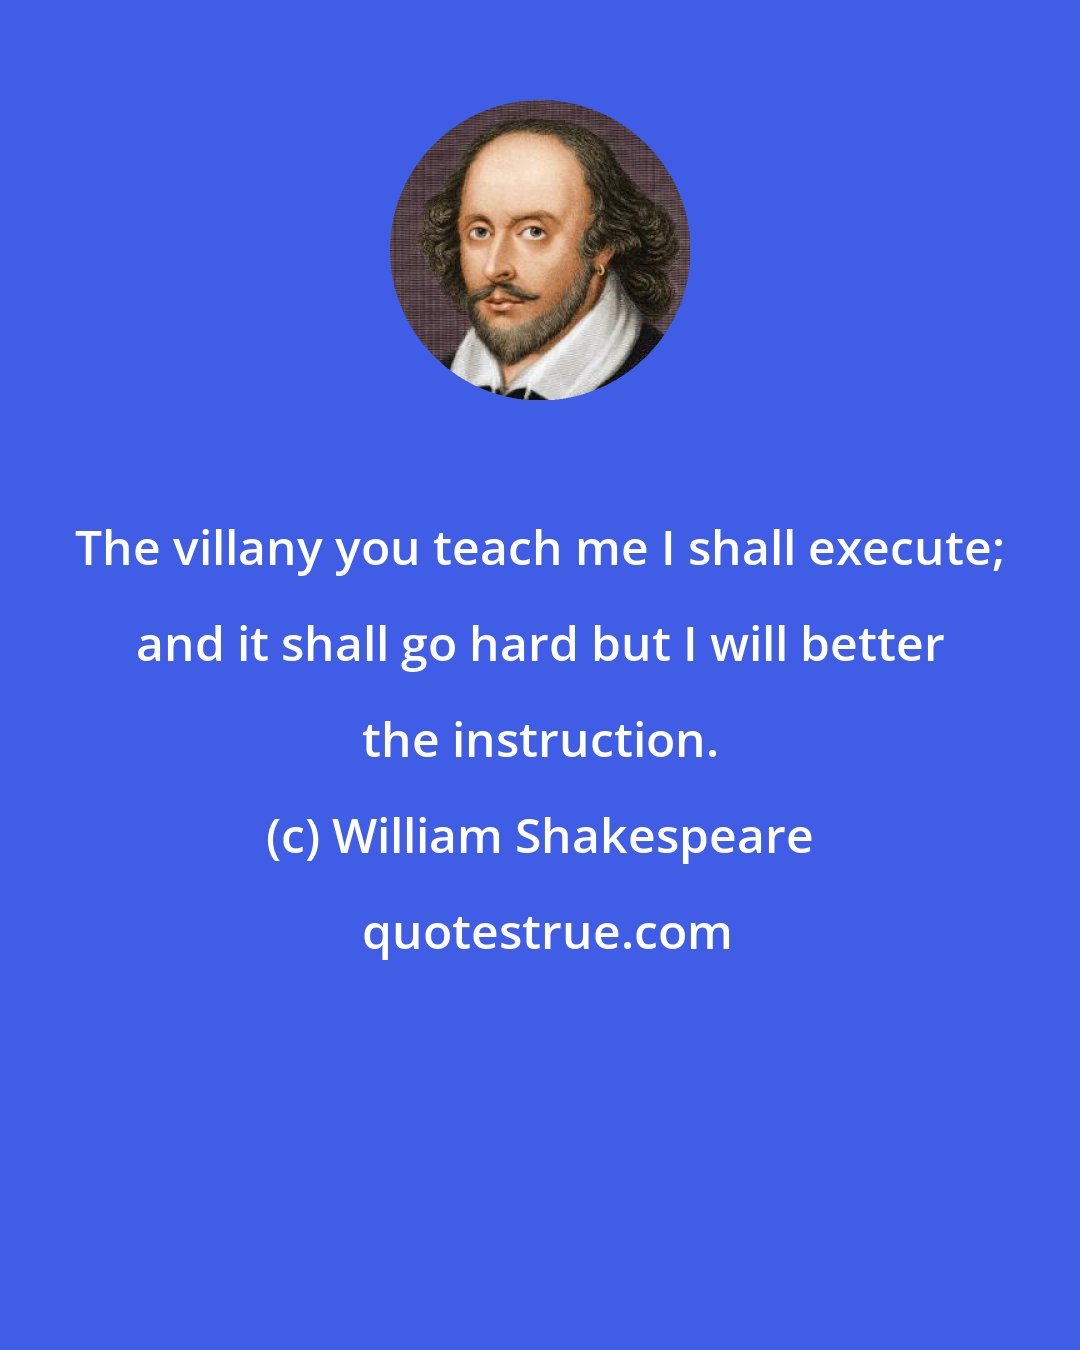 William Shakespeare: The villany you teach me I shall execute; and it shall go hard but I will better the instruction.